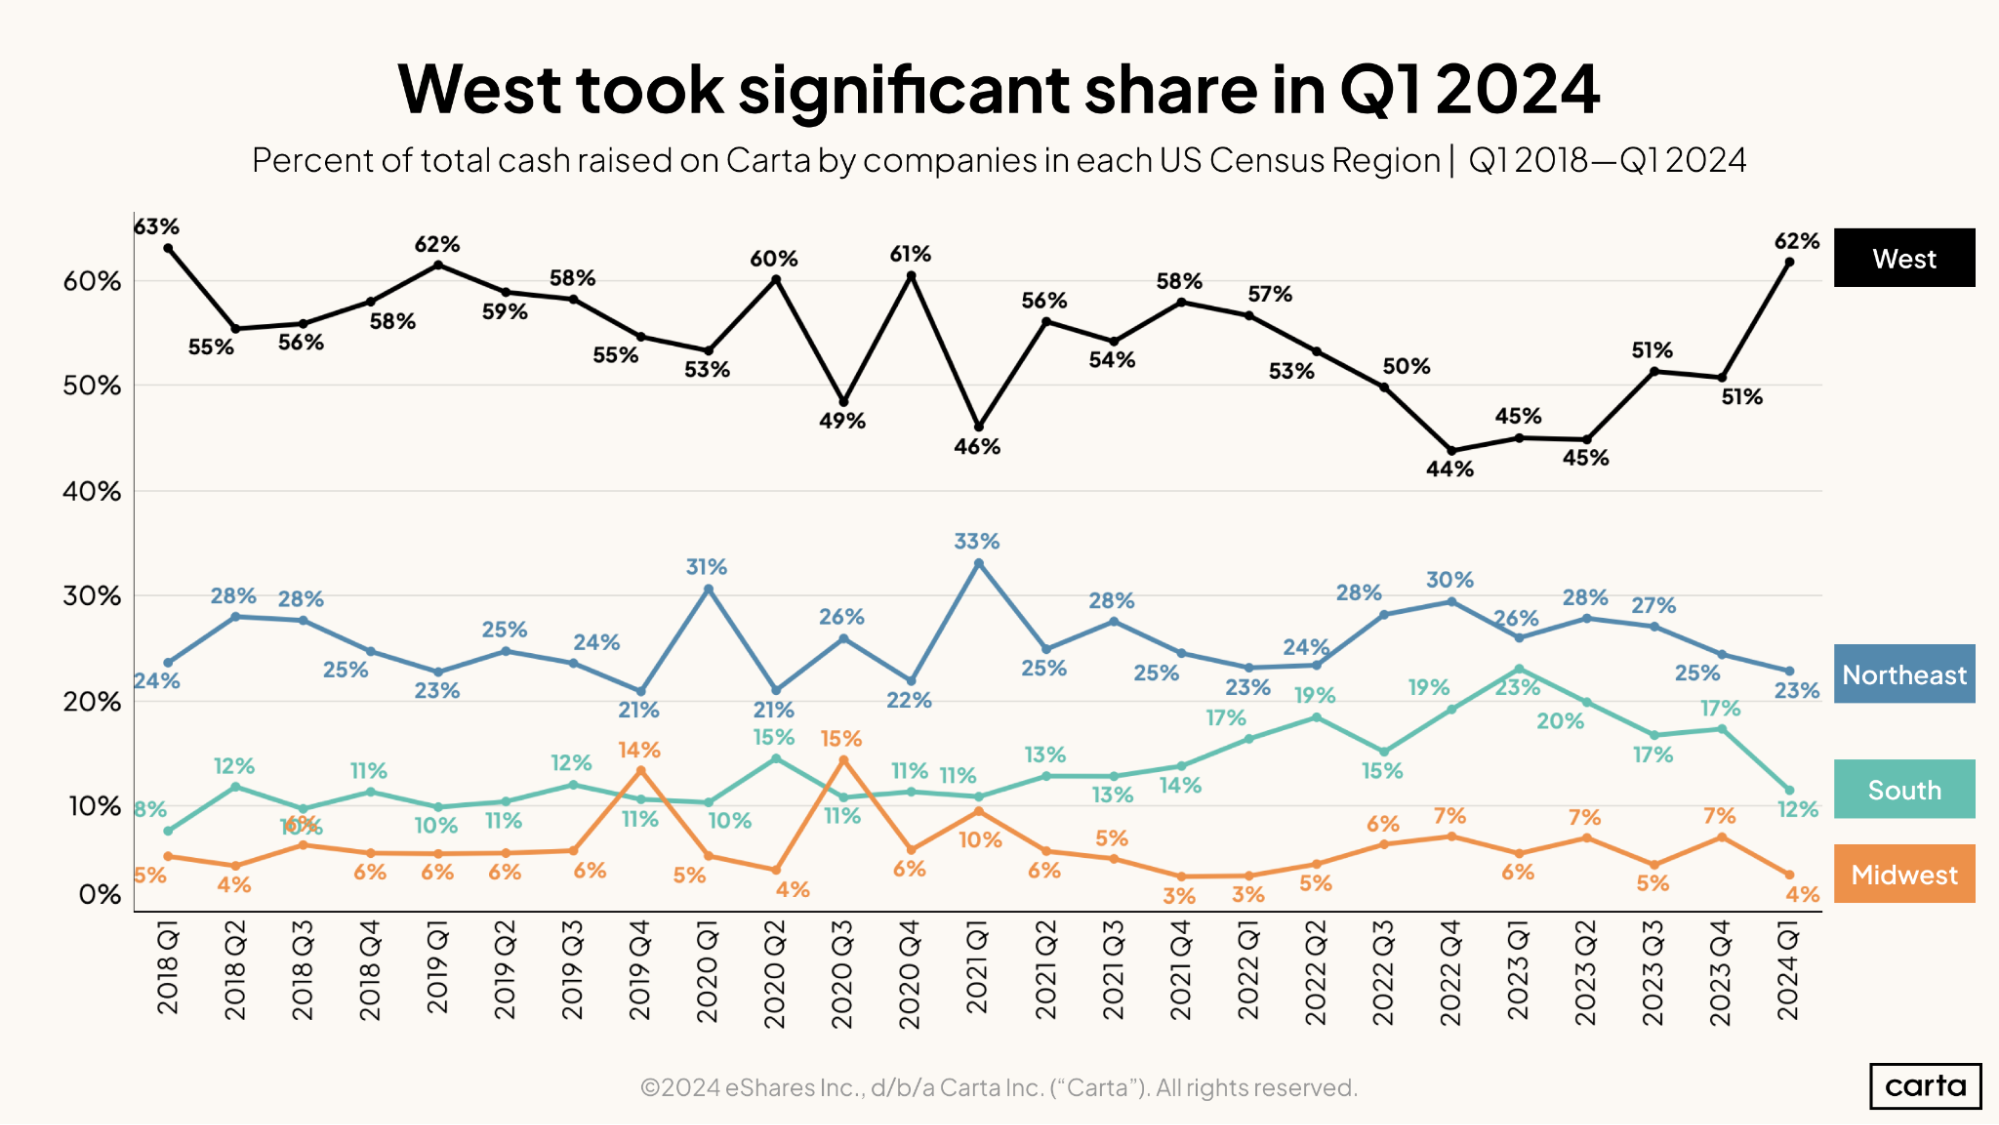 West took significant share in Q1 2024